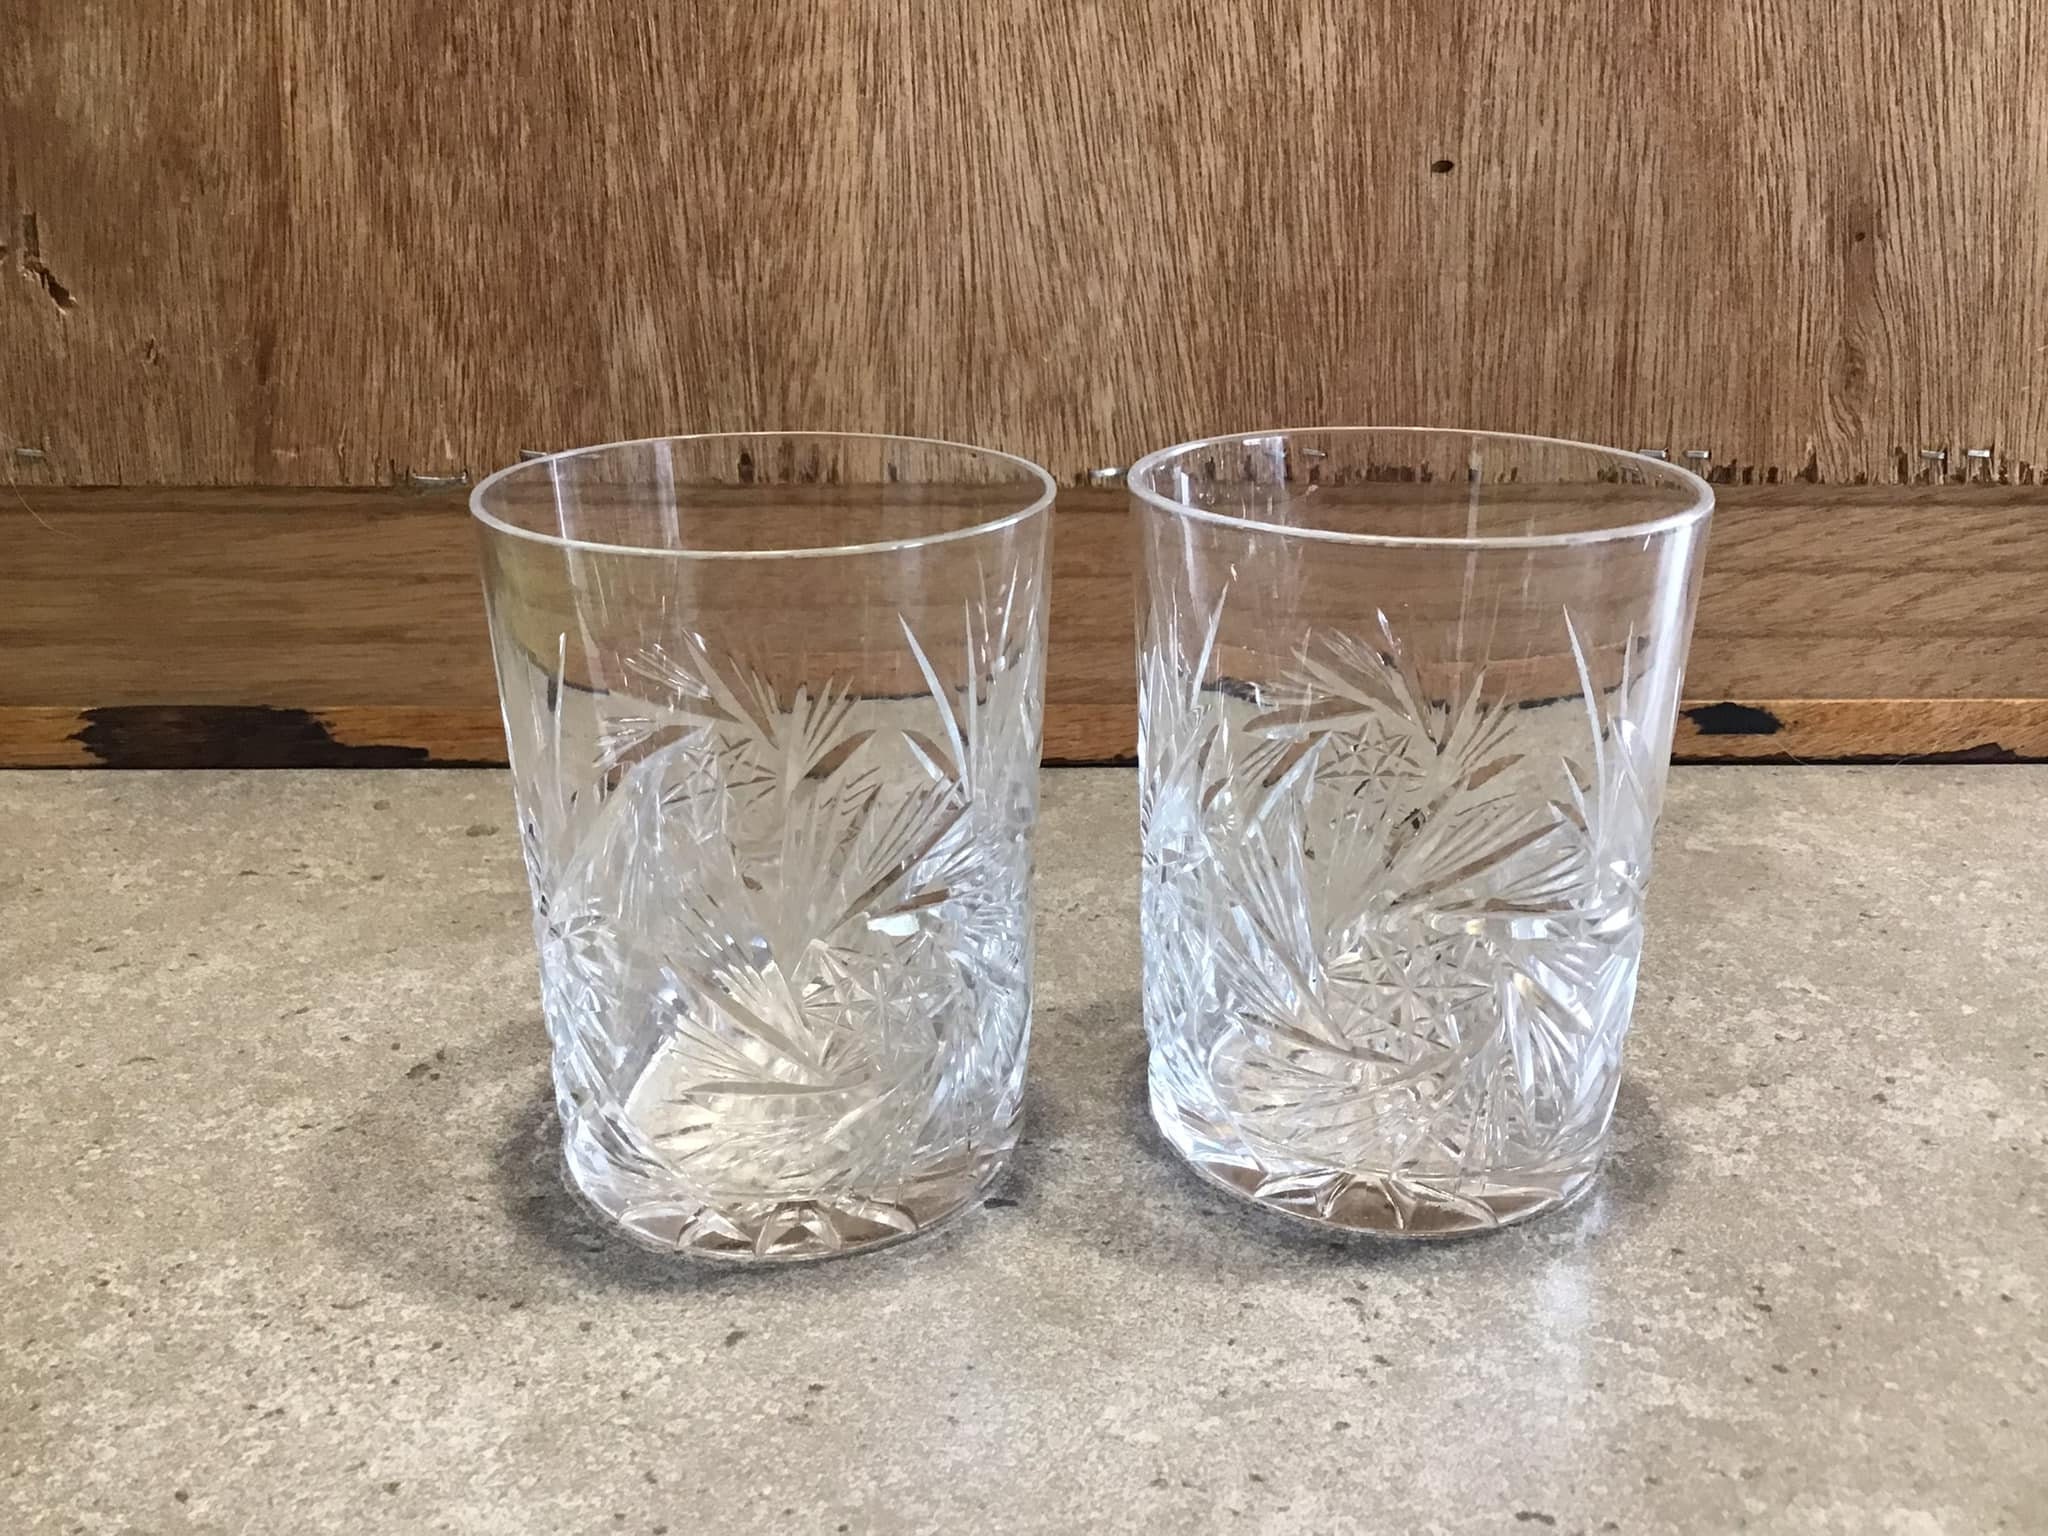 ONE TO LAST Whiskey Glasses Set of 2 - Hand Blown Double Walled Glass,  Thick Rocks Glasses with Prem…See more ONE TO LAST Whiskey Glasses Set of 2  